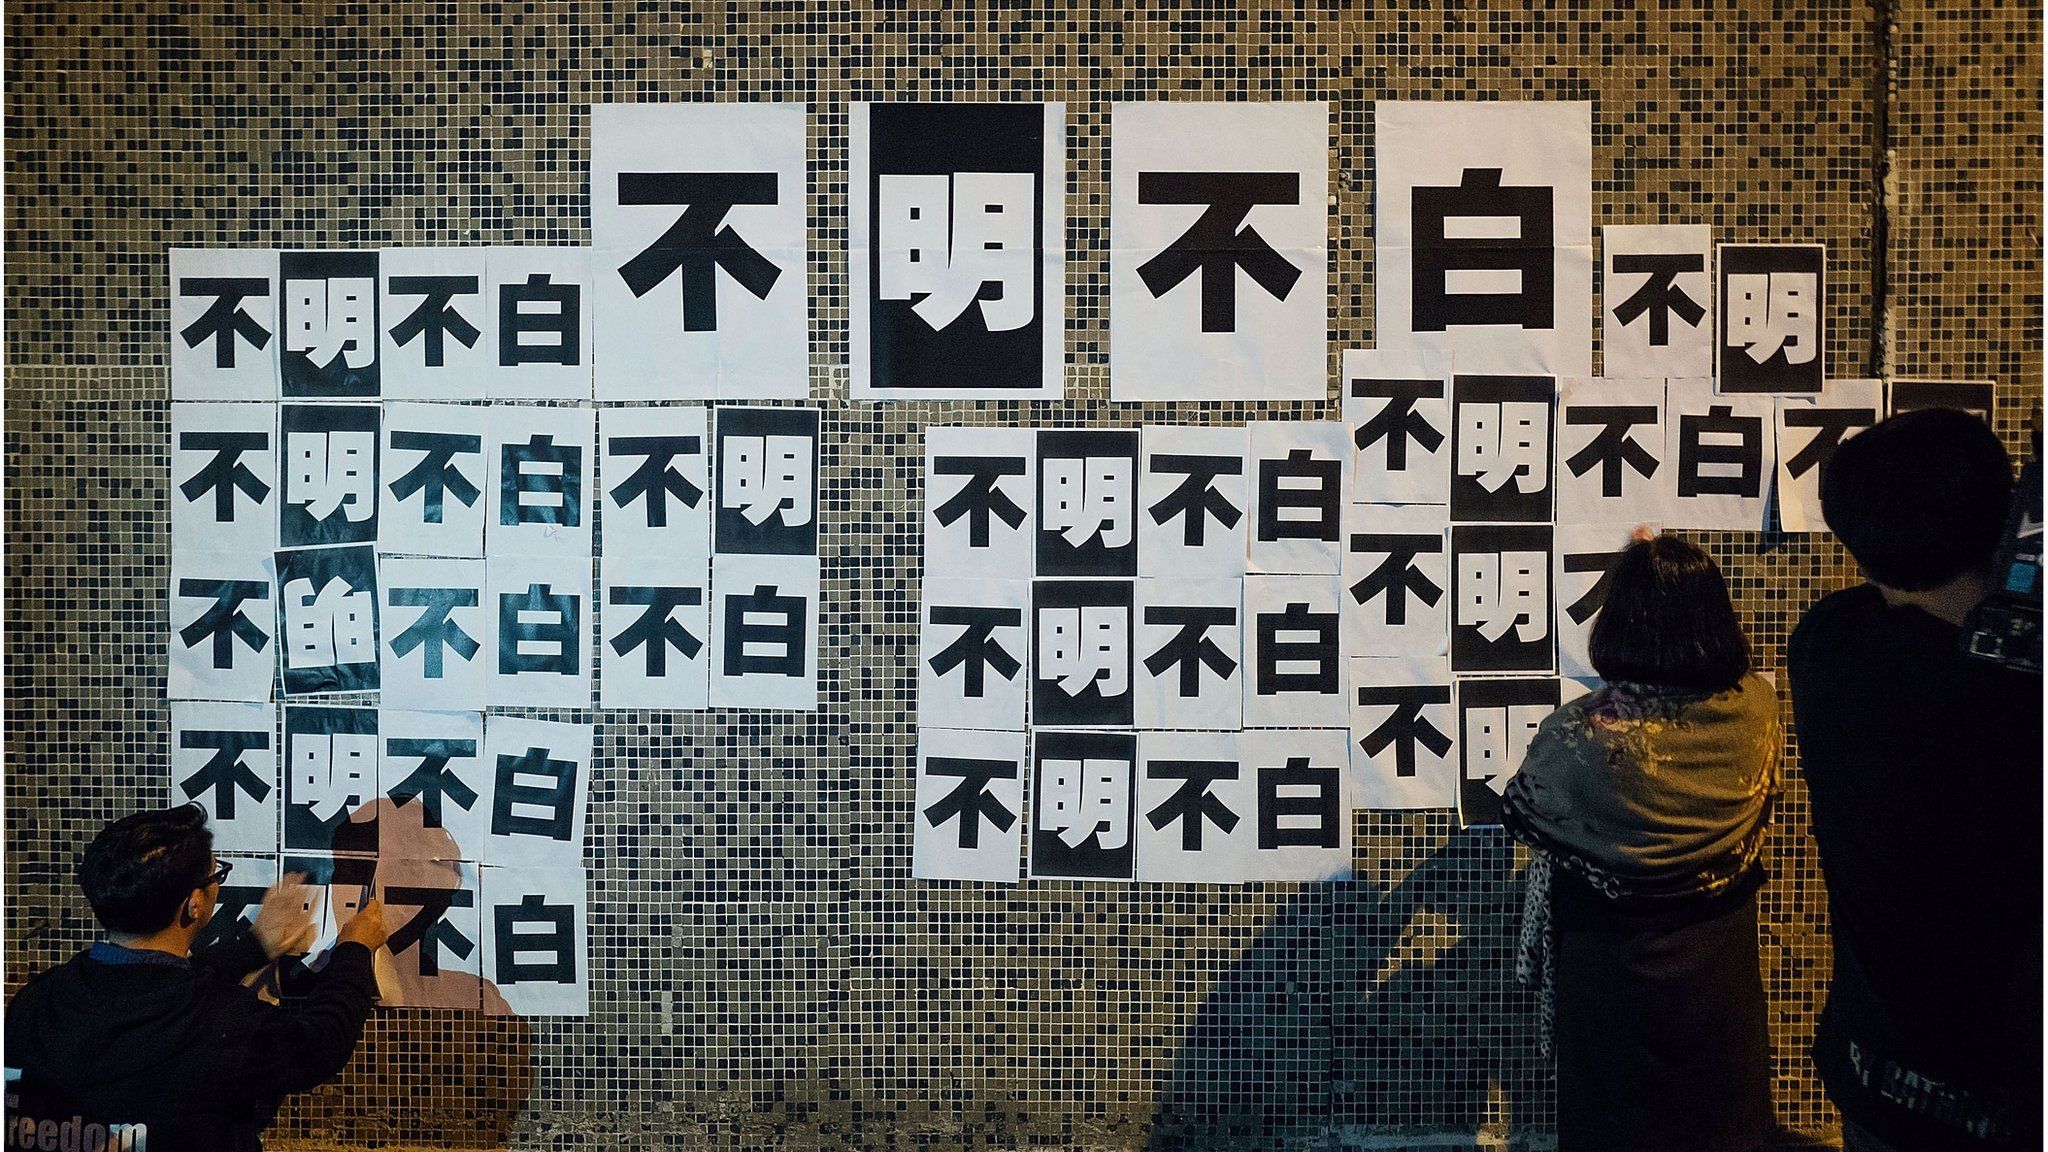 Staff members of Ming Pao put signs up on a wall saying "Unclear" in Chinese during a protest outside of Ming Pao headquarter on 20 April